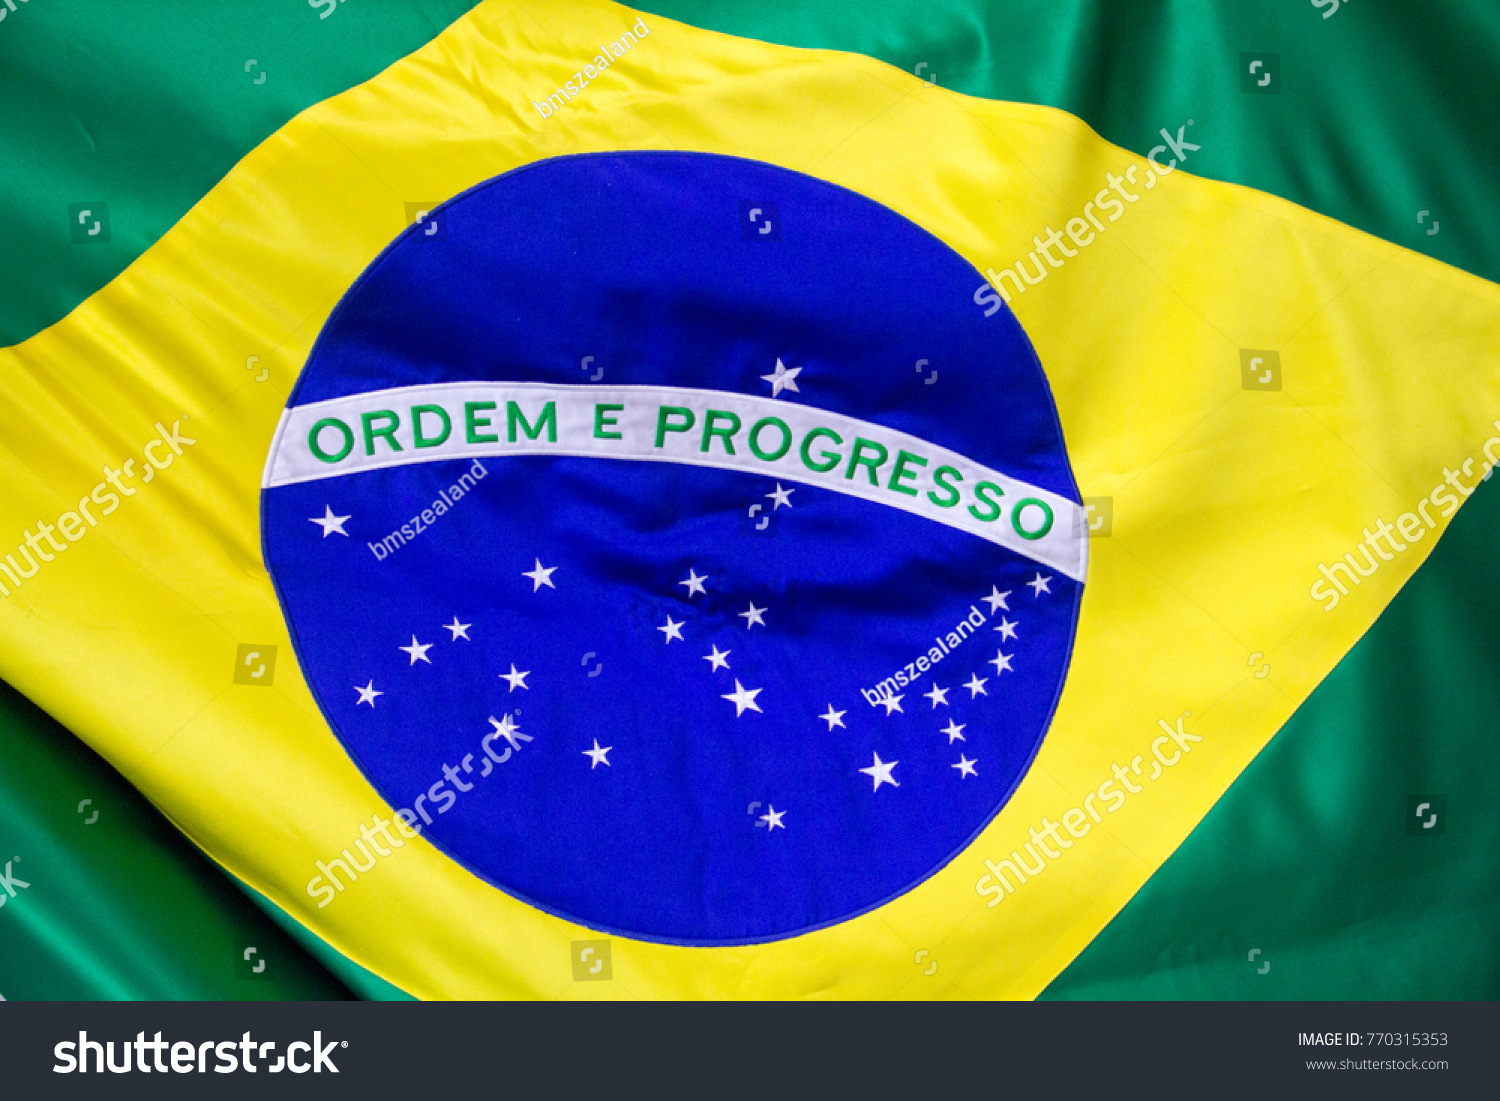 The Brazilian flag in fabric, with a close up of the blue disc depicting a starry sky  spanned by the national motto "Ordem e Progresso"  ("Order and Progress"), within a yellow rhombus, on green.  #770315353